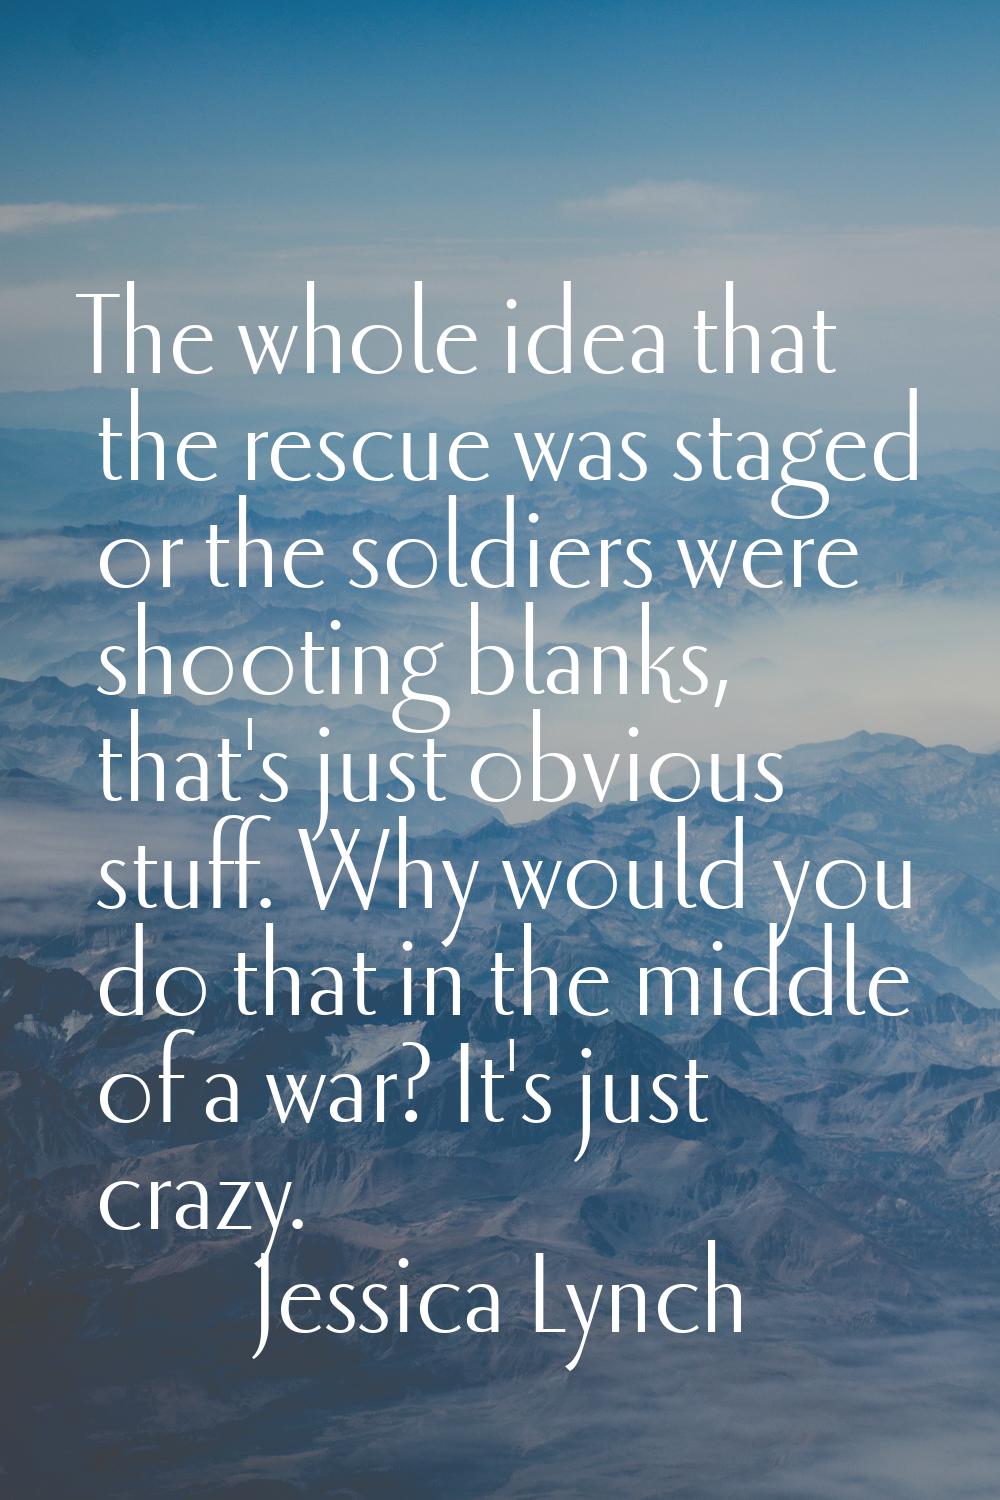 The whole idea that the rescue was staged or the soldiers were shooting blanks, that's just obvious